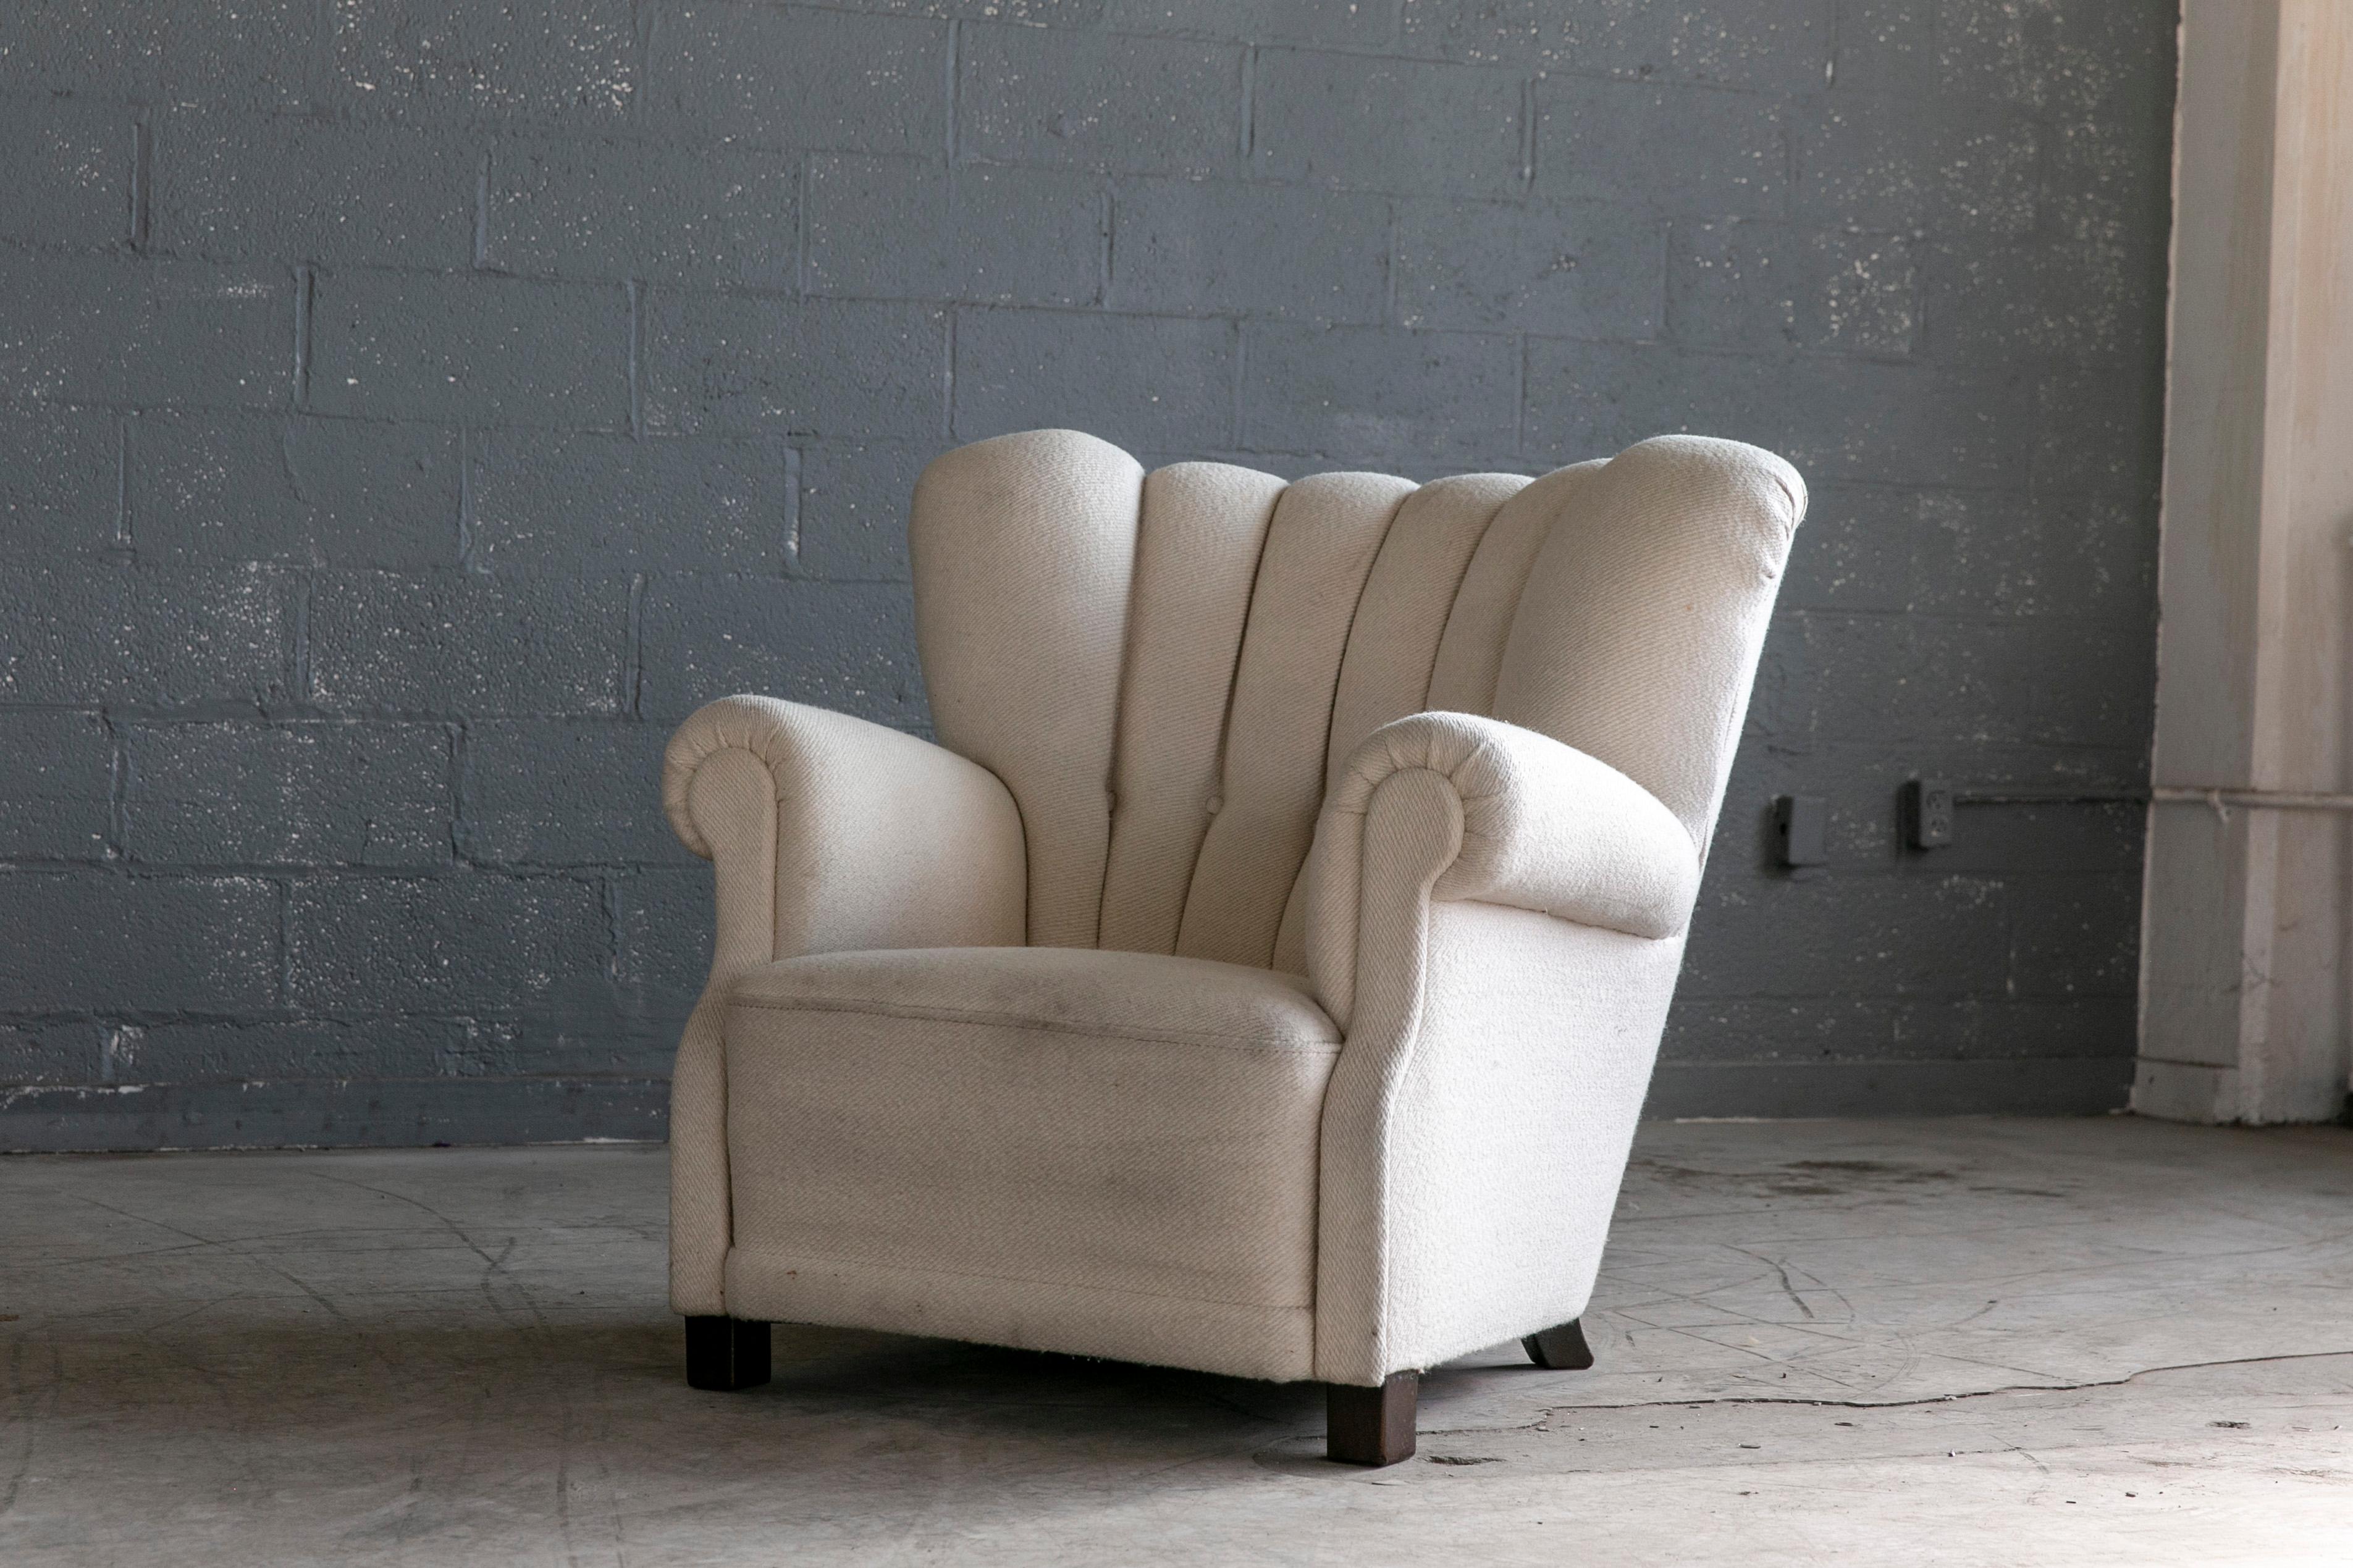 Sublime large scale club chair model 1518 by Fritz Hansen manufactured sometime in the 1940's. The model 1518 is a well-known and sought after Fritz Hansen design which was first seen in the company's 1942 catalog. We love the generous proportions